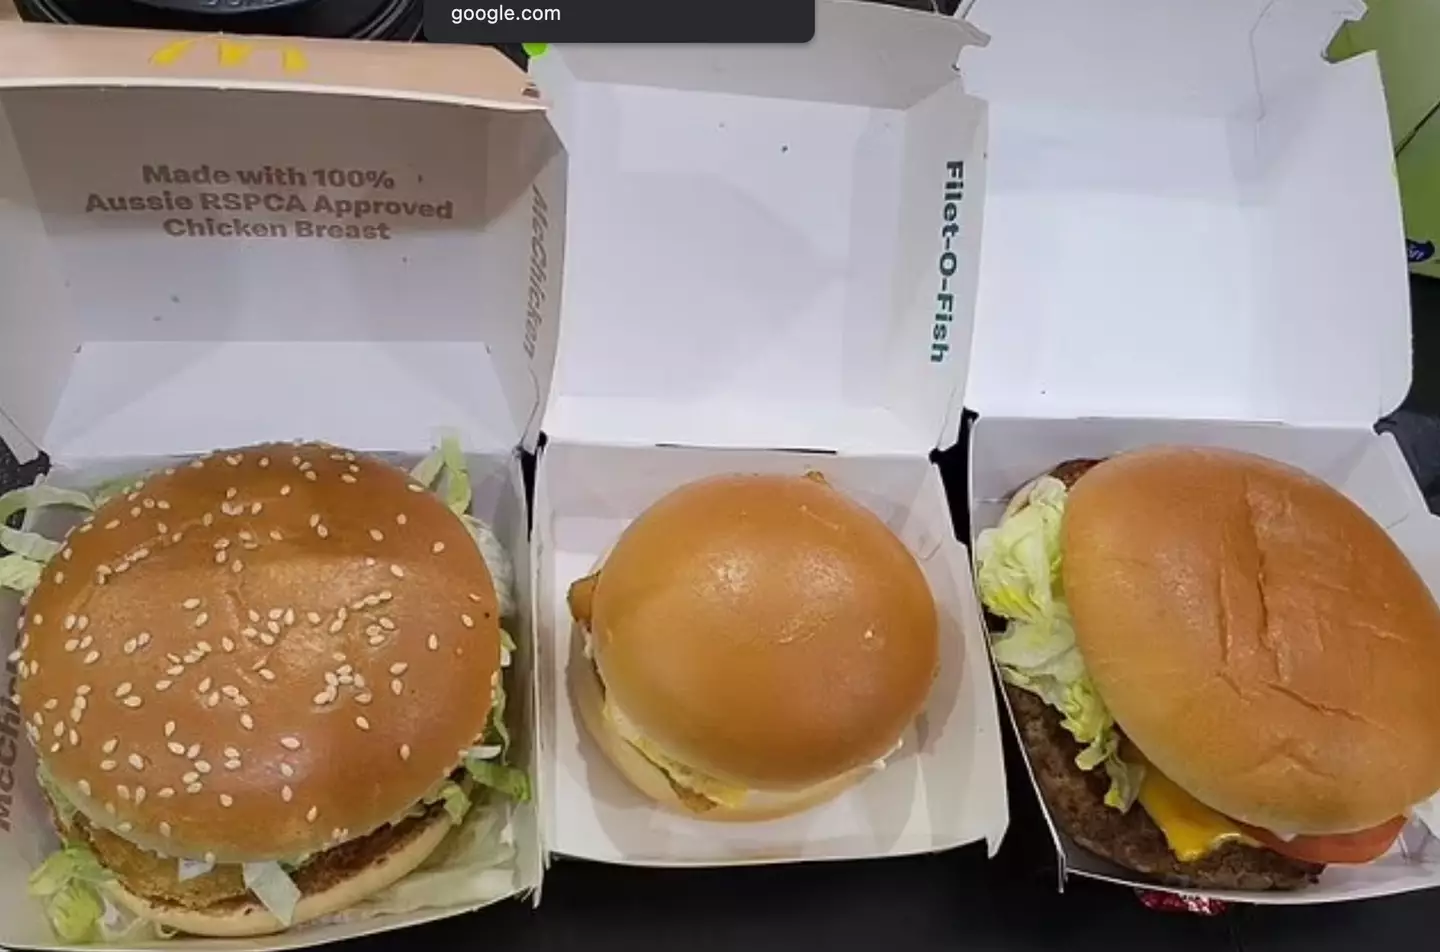 McDonald's denies any conspiracy that their burgers have shrunk.